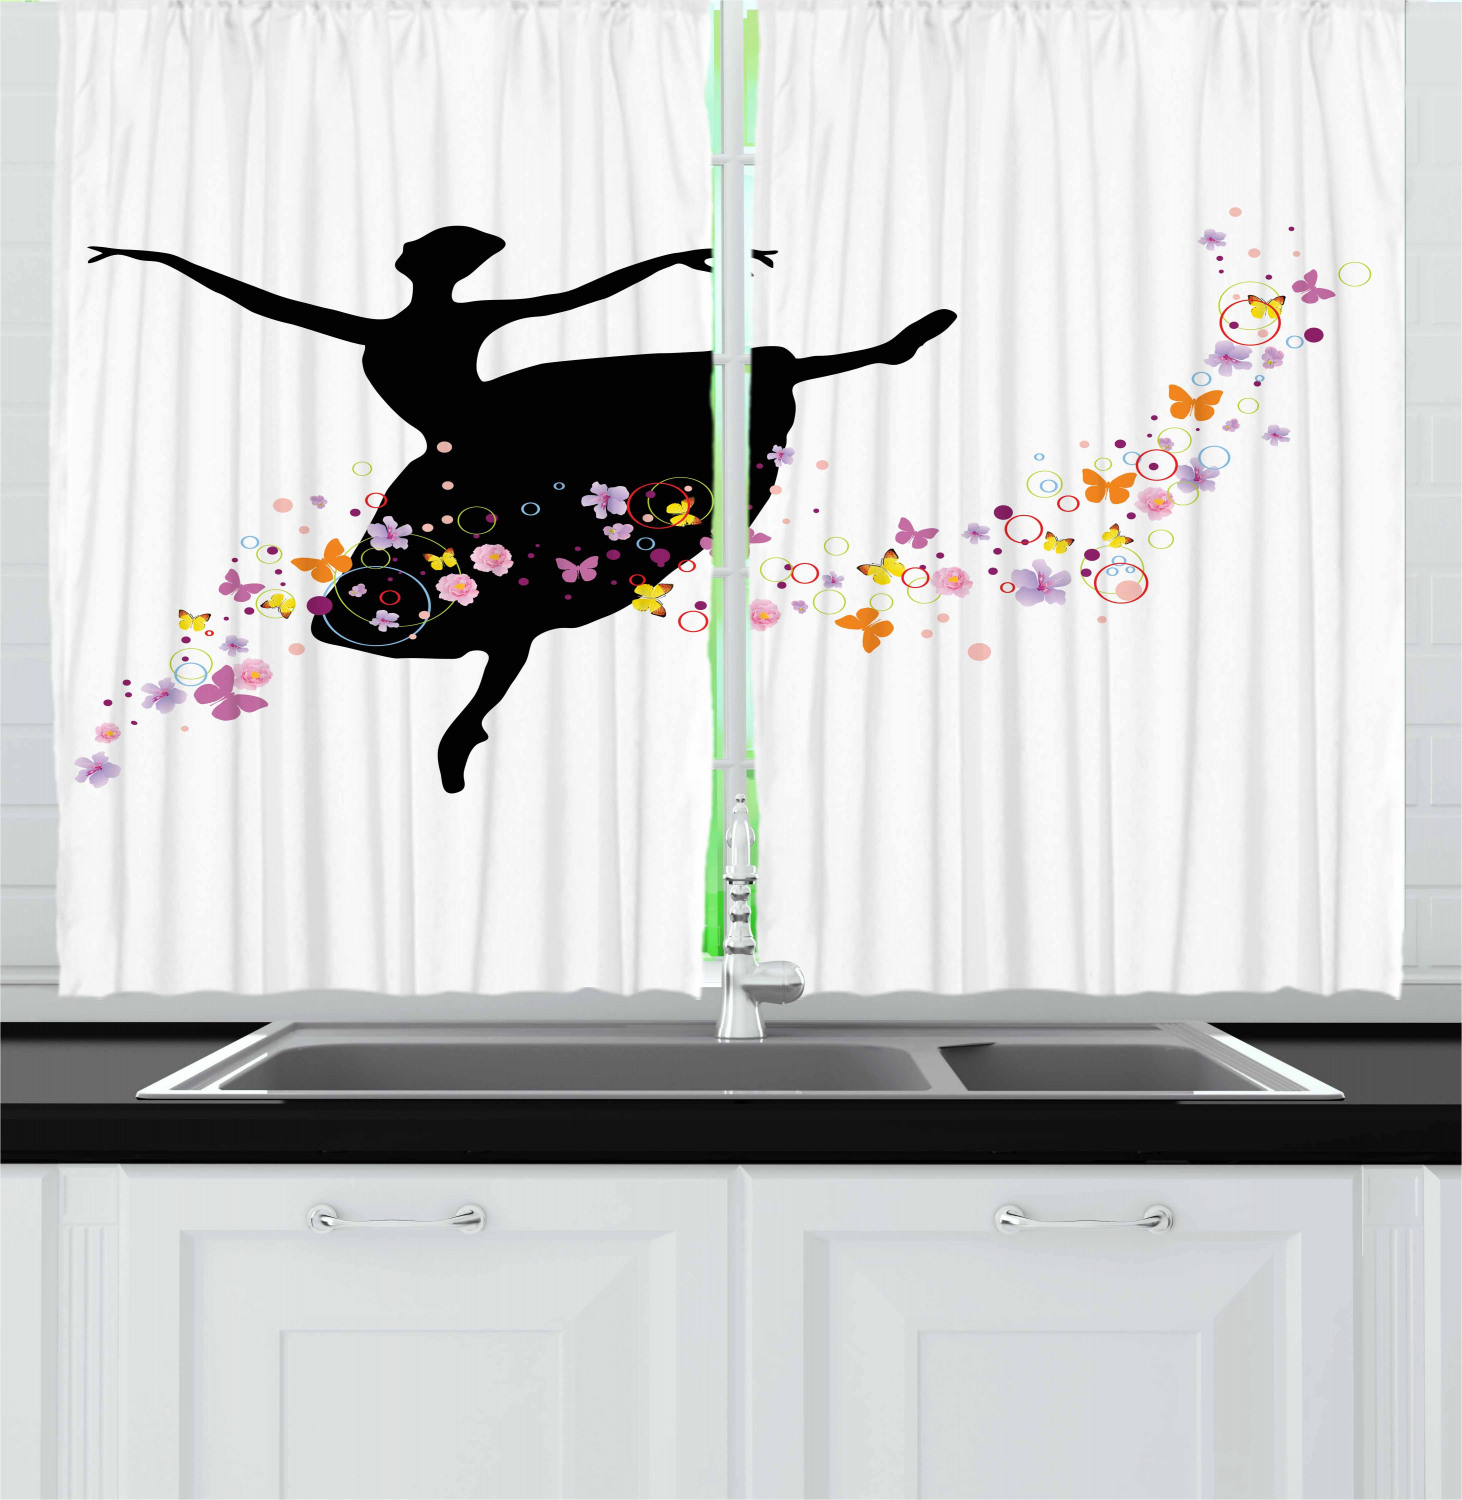 Ballet Kitchen Curtains 2 Panel Set Window Drapes 55" X 39" by Ambesonne 